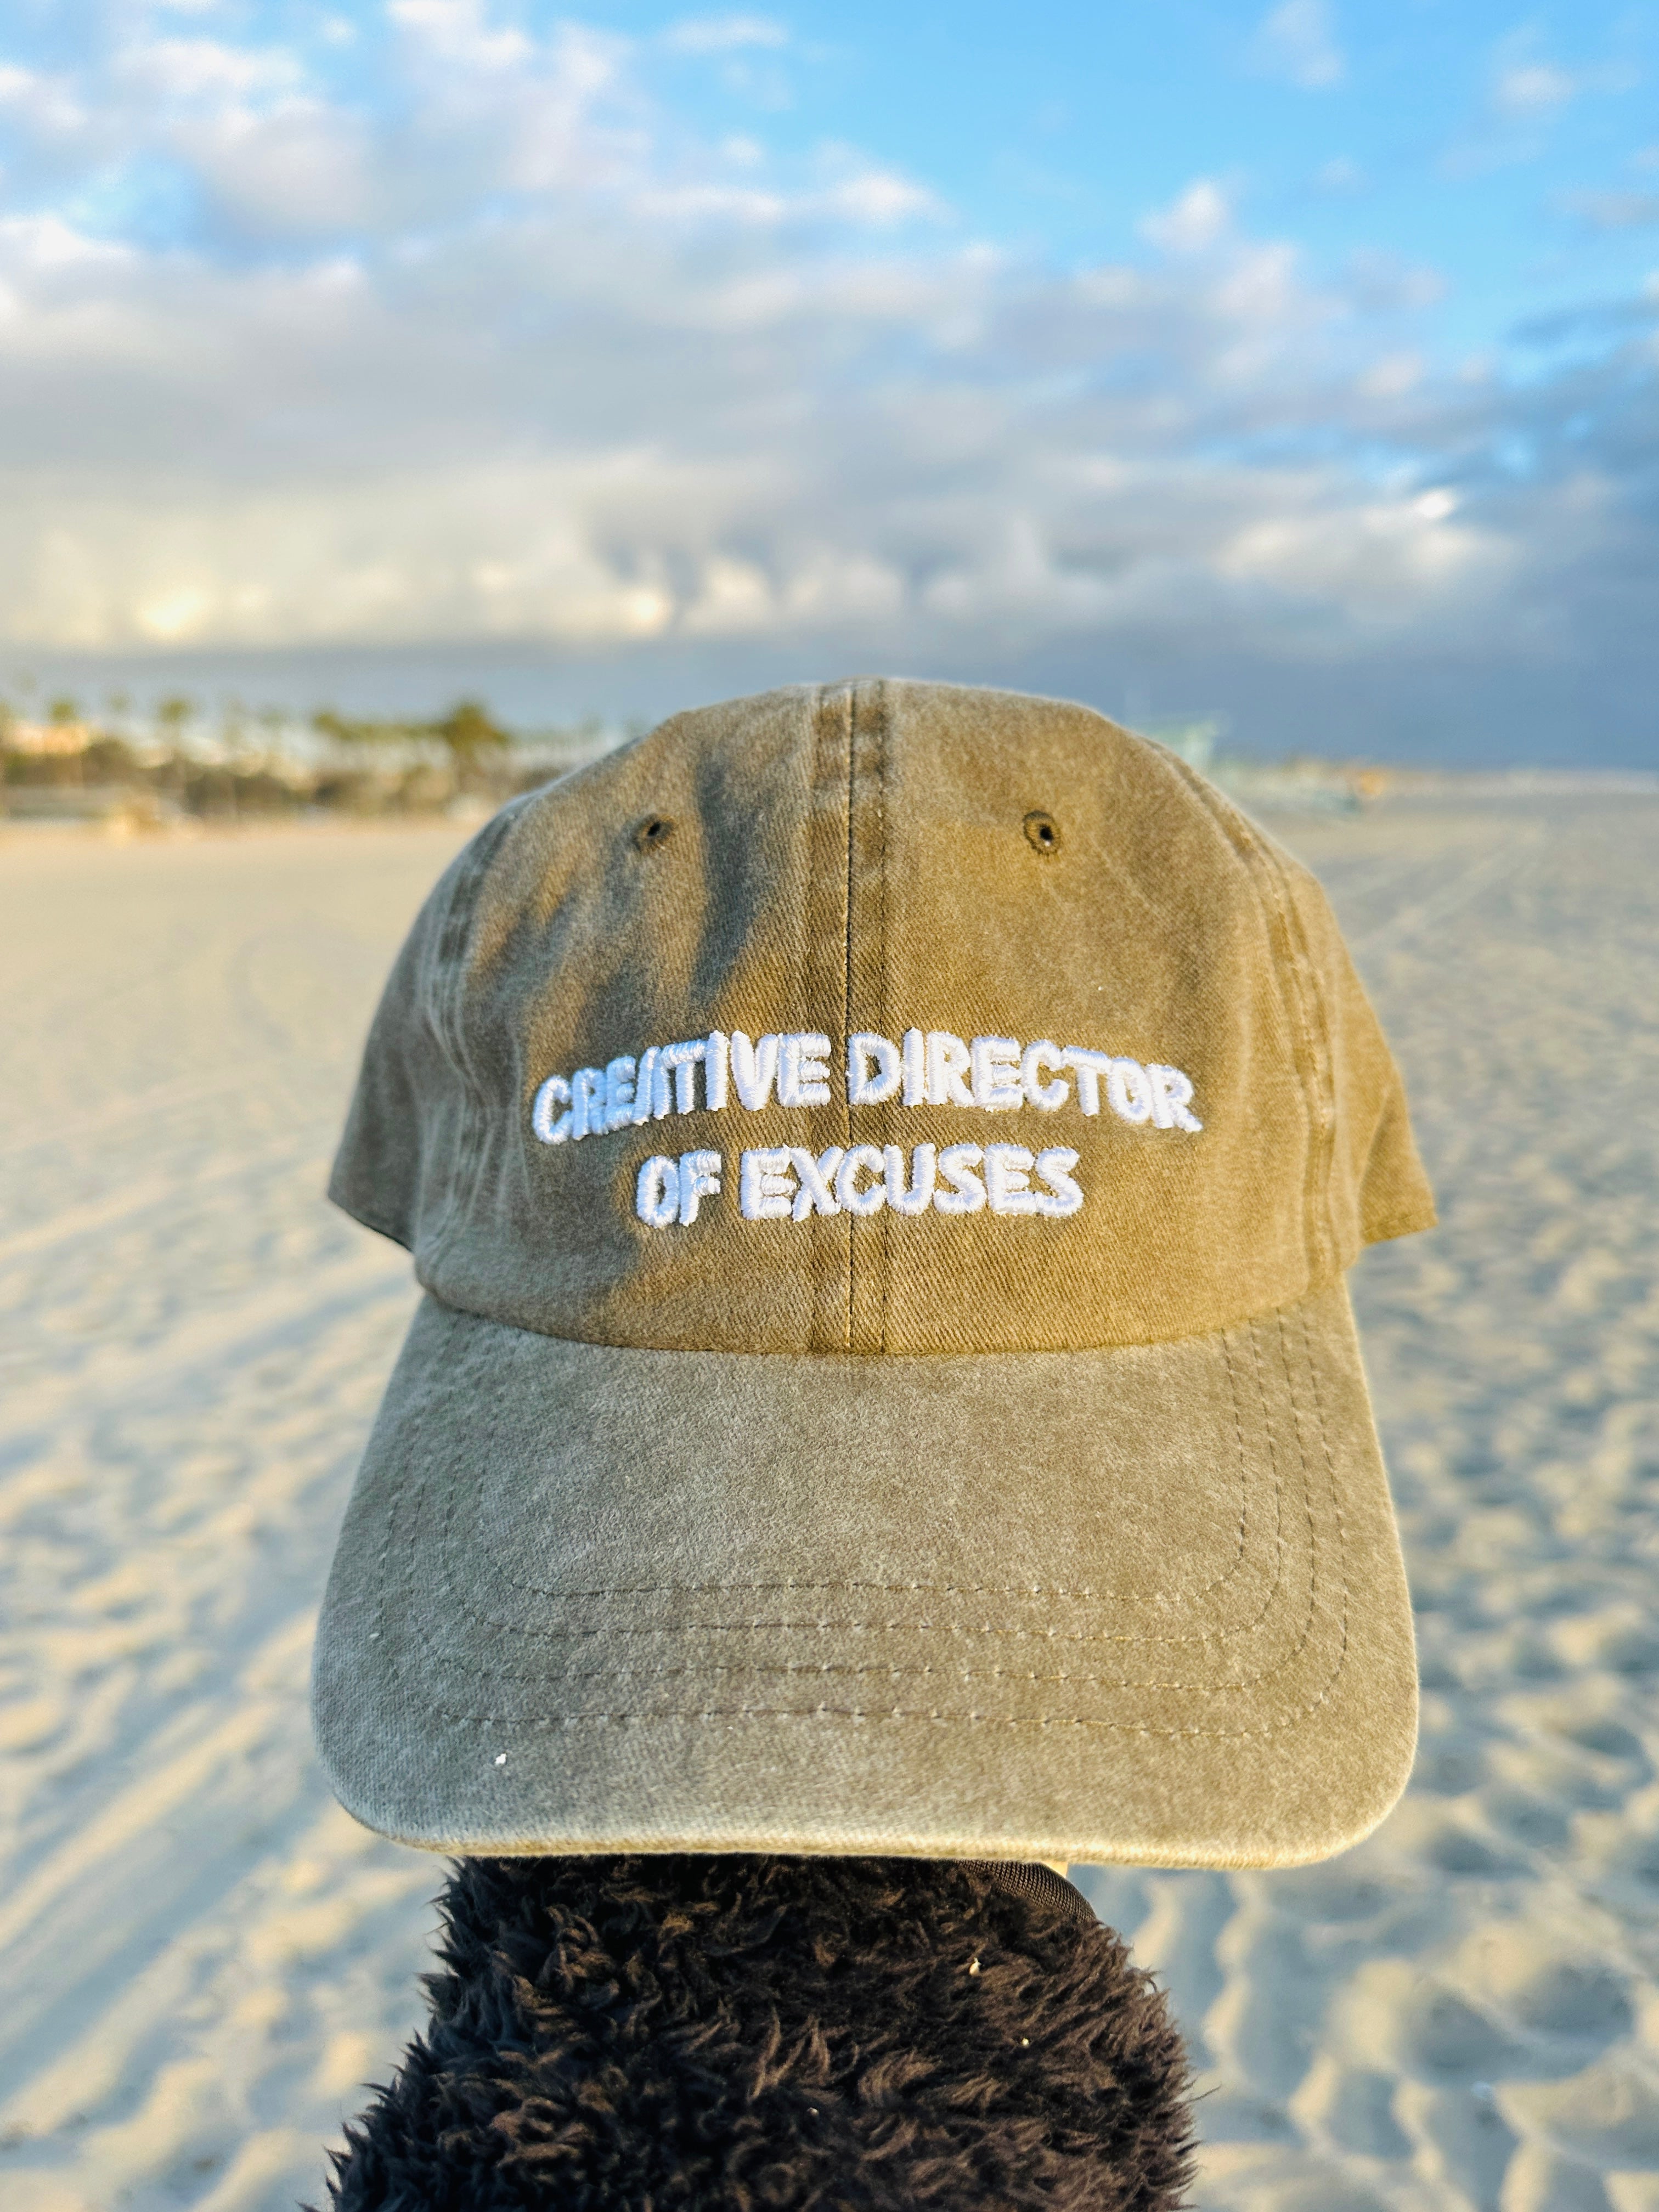 22NJ Washed Creative Director of Excuses Cap